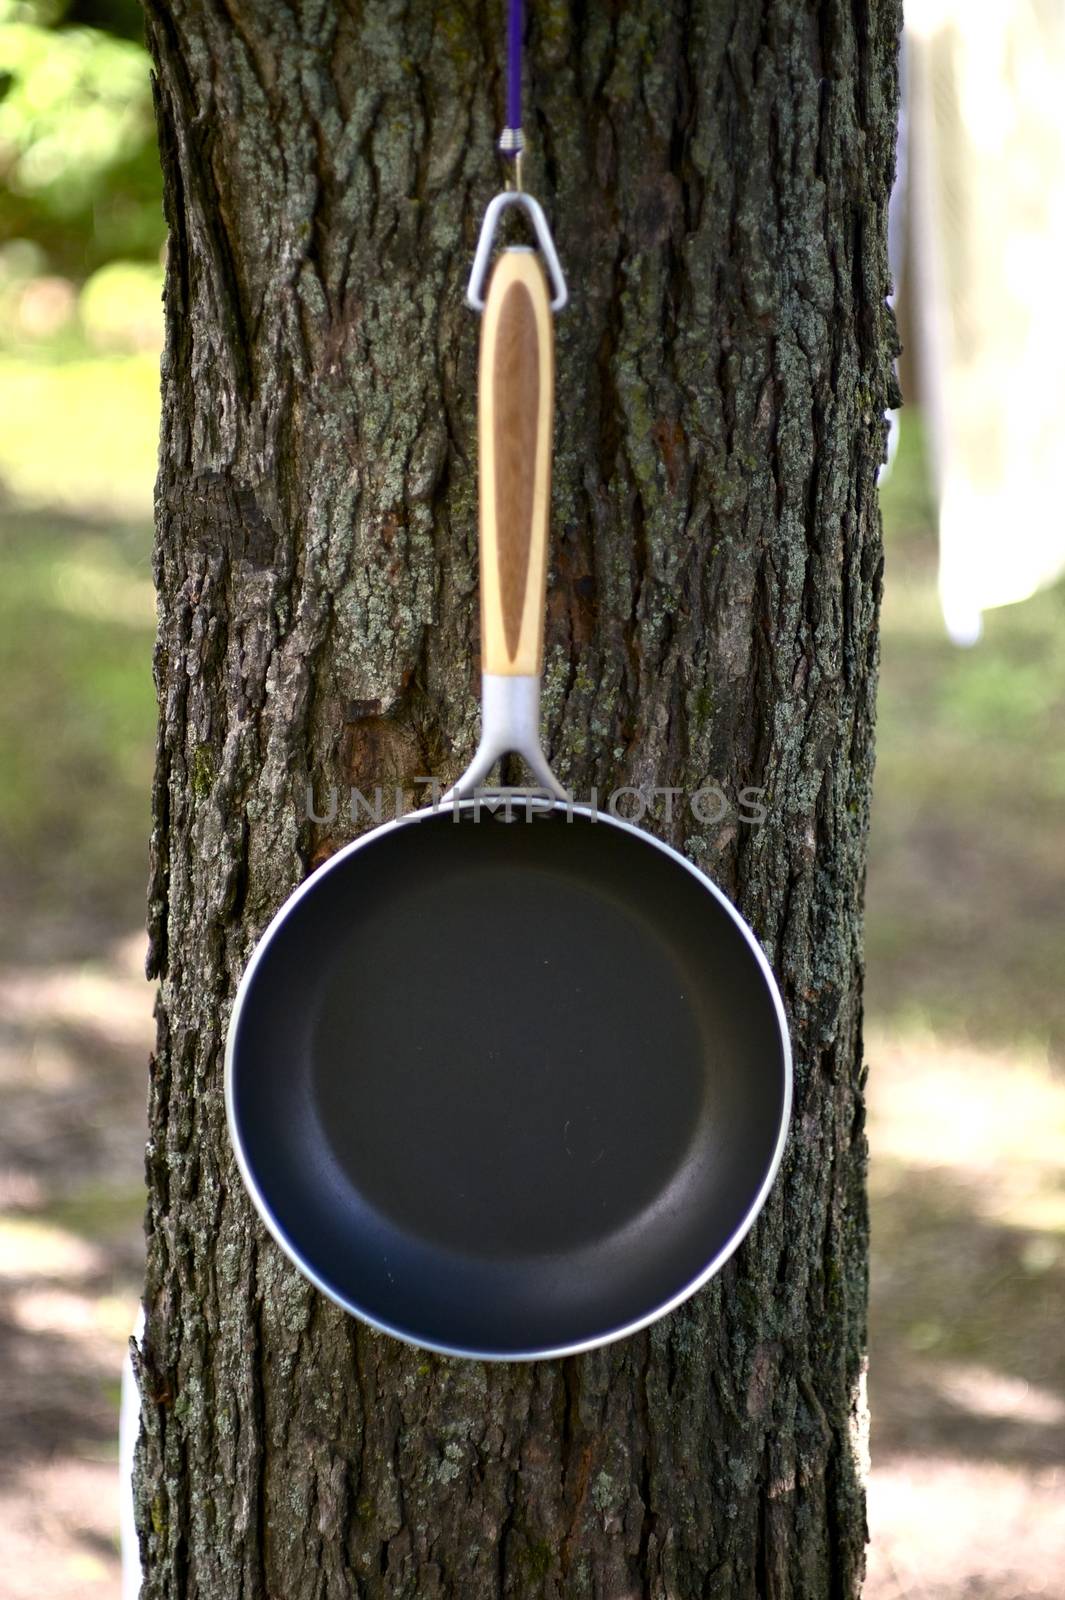 Frying Pan / Skillet on the Tree - Outdoor Camping Theme. Vertical Photo